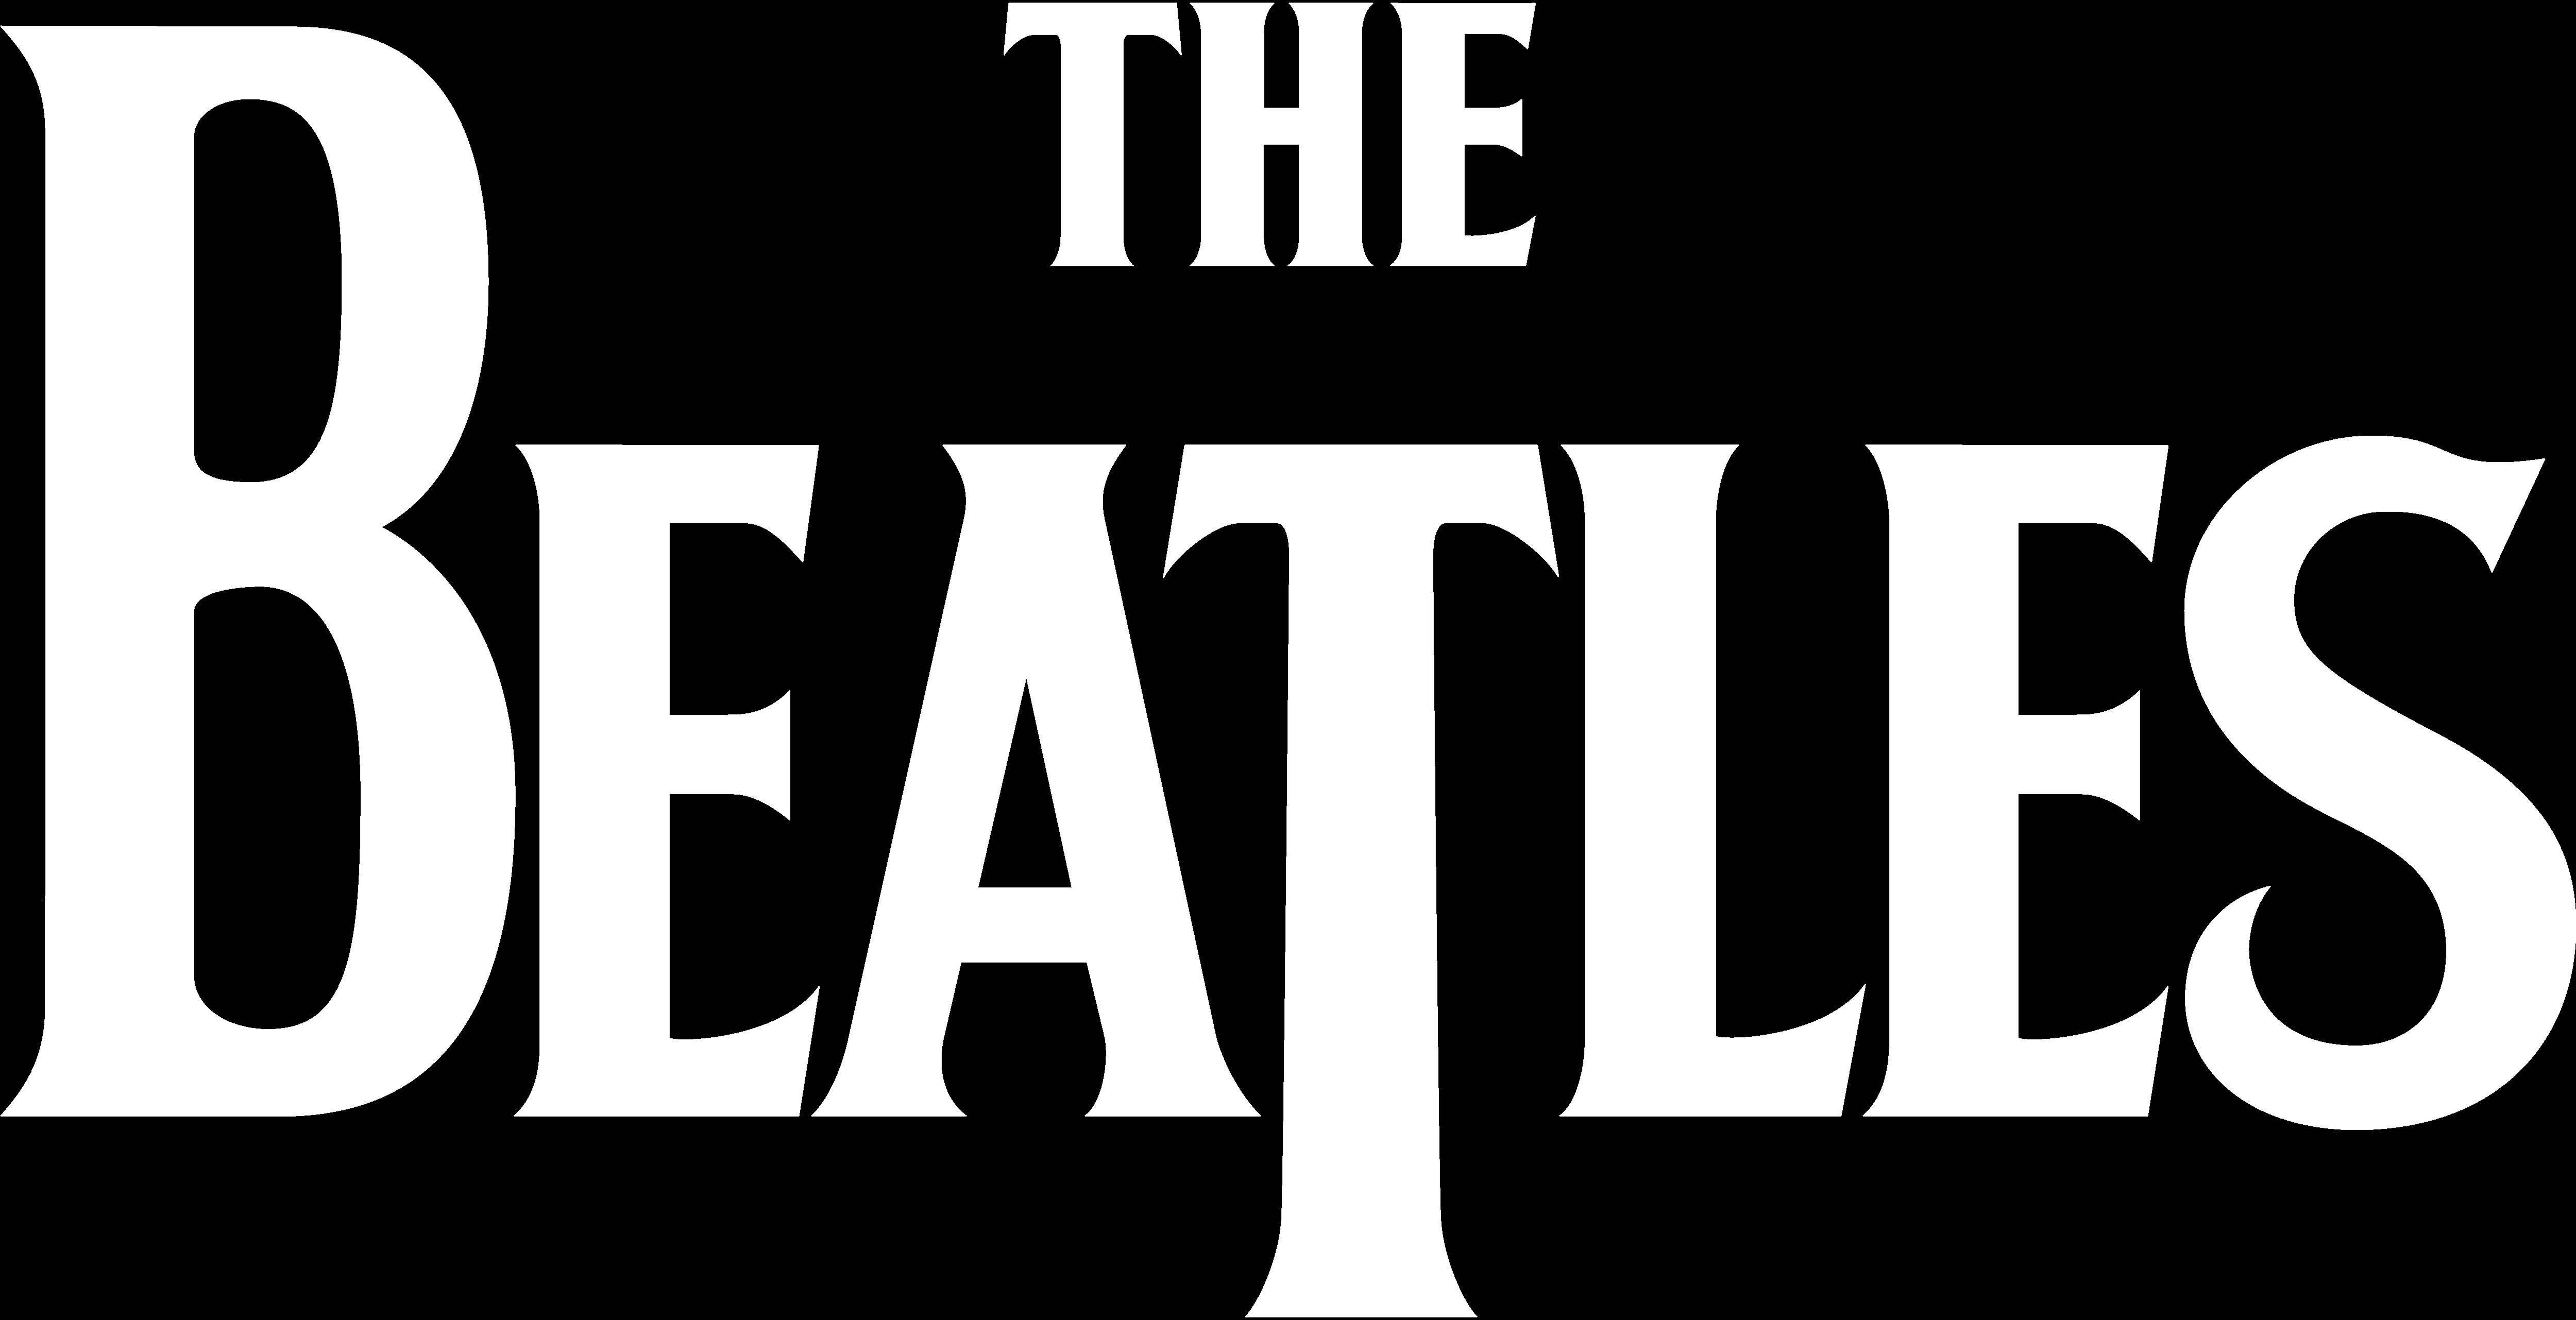 Beatles Logo Collage By Illta - Logo Png The Beatles, Transparent Png ,  Transparent Png Image - PNGitem